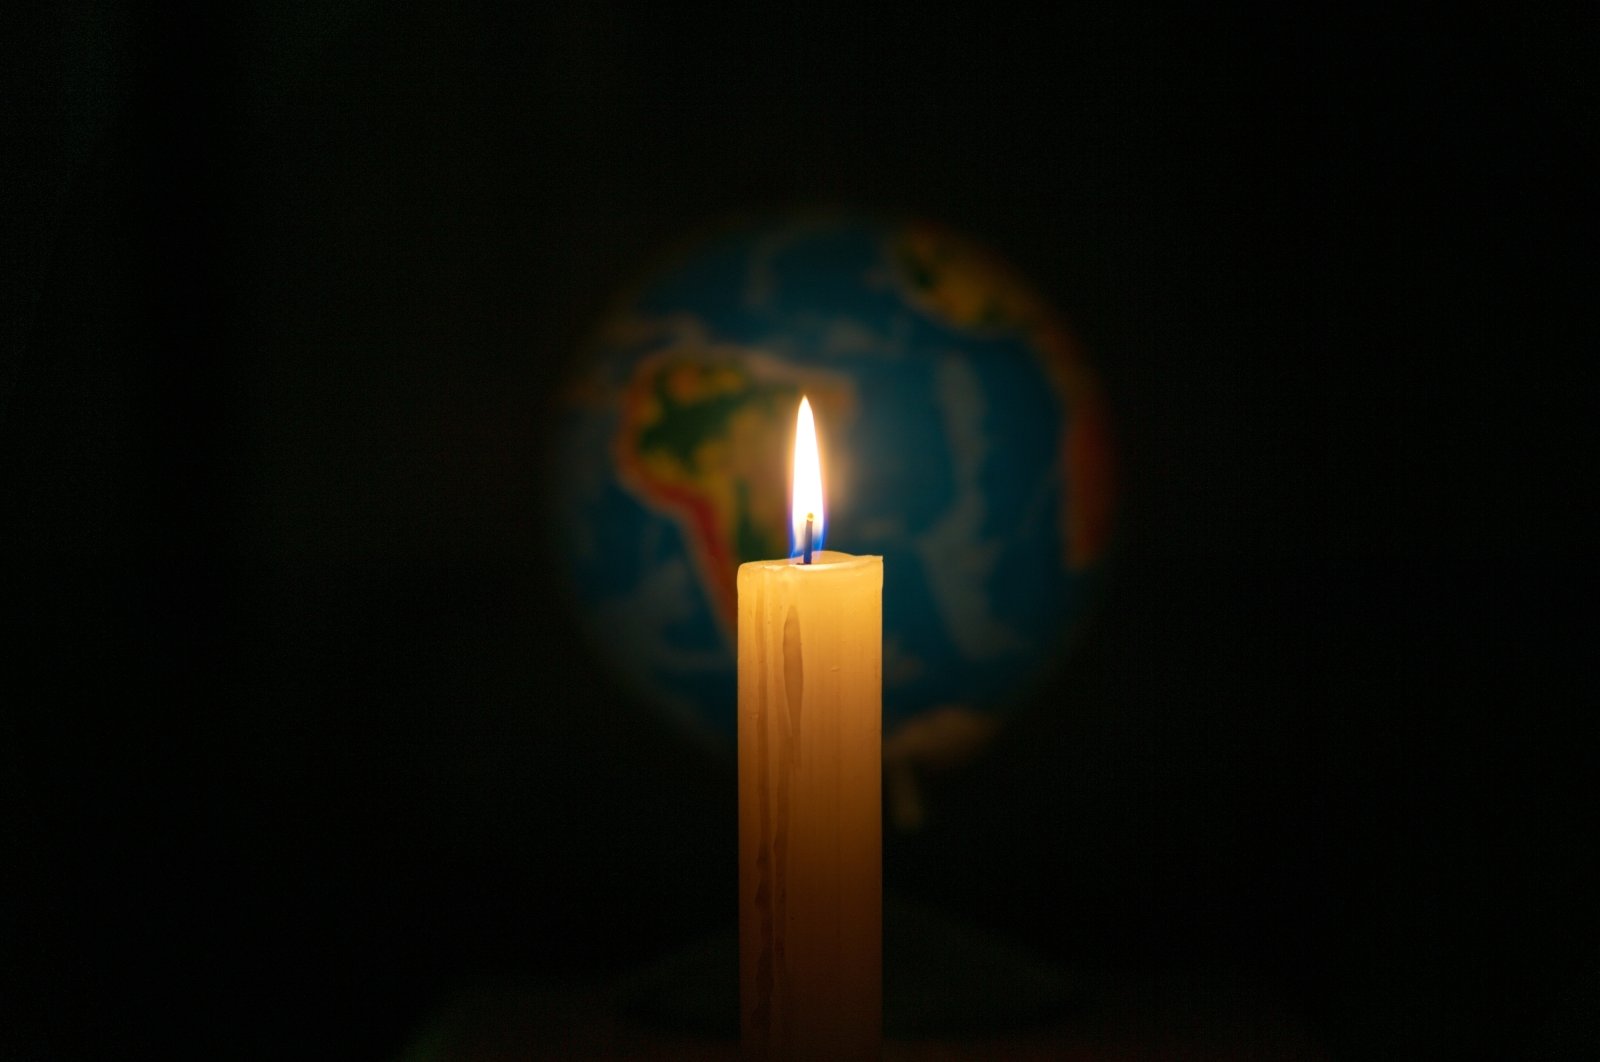 This year &quot;Earth Hour&quot; will take place on March 25 between 8:30 p.m. and 9:30 p.m. in Türkiye (5:30 p.m.-6:30 p.m. GMT). (Shutterstock Photo)